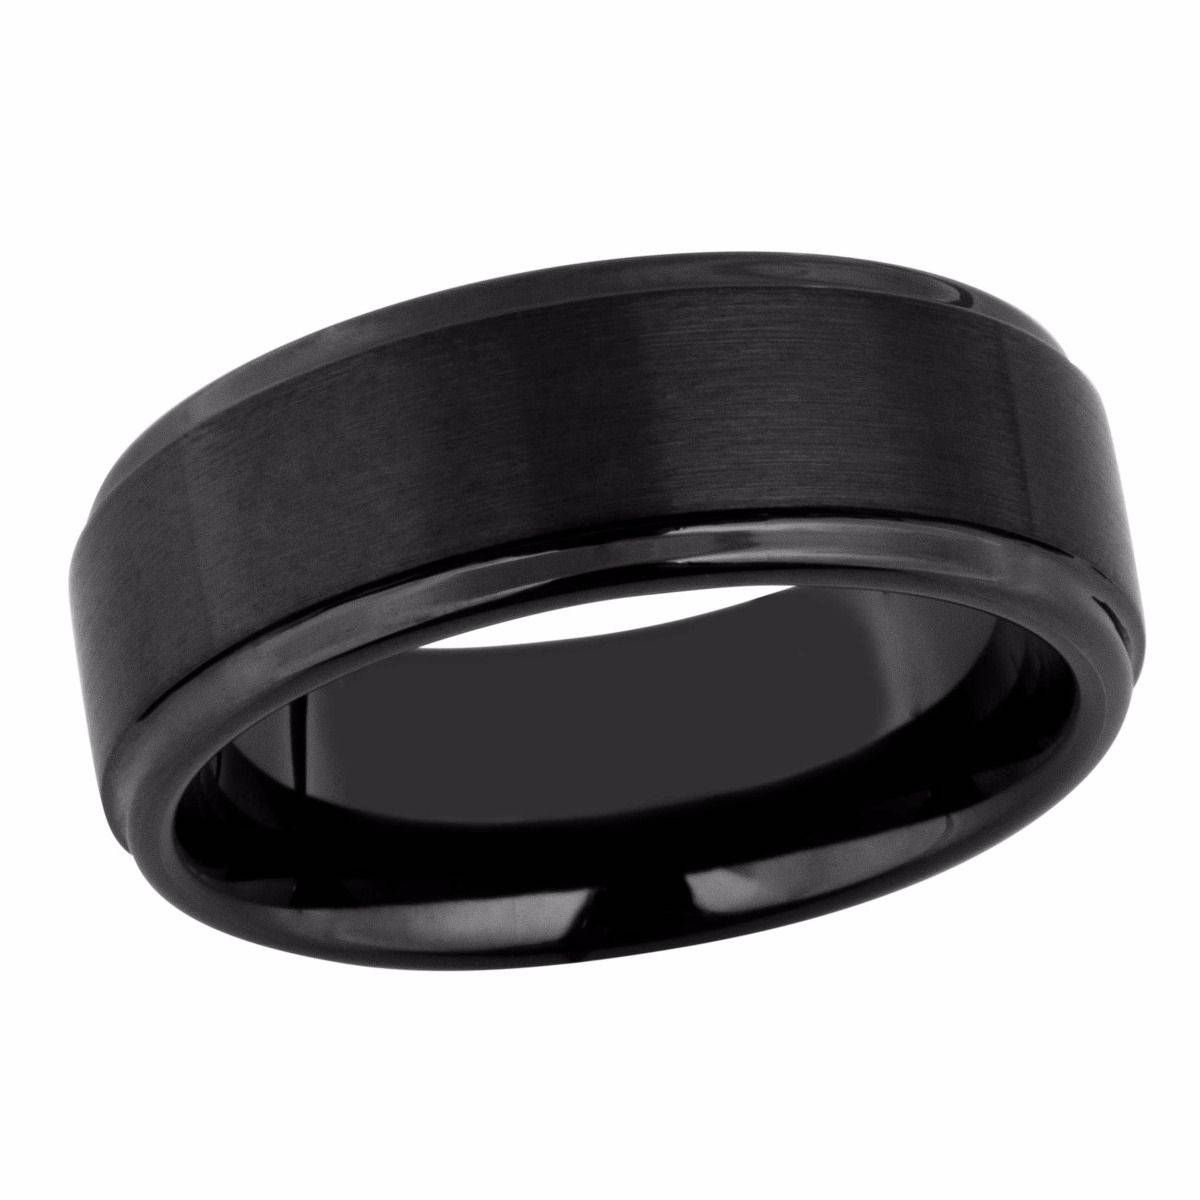 Men's Ceramic Wedding Band – Re 9190 Bpr | Riddle's Jewelry For Ceramic Wedding Bands (View 15 of 15)